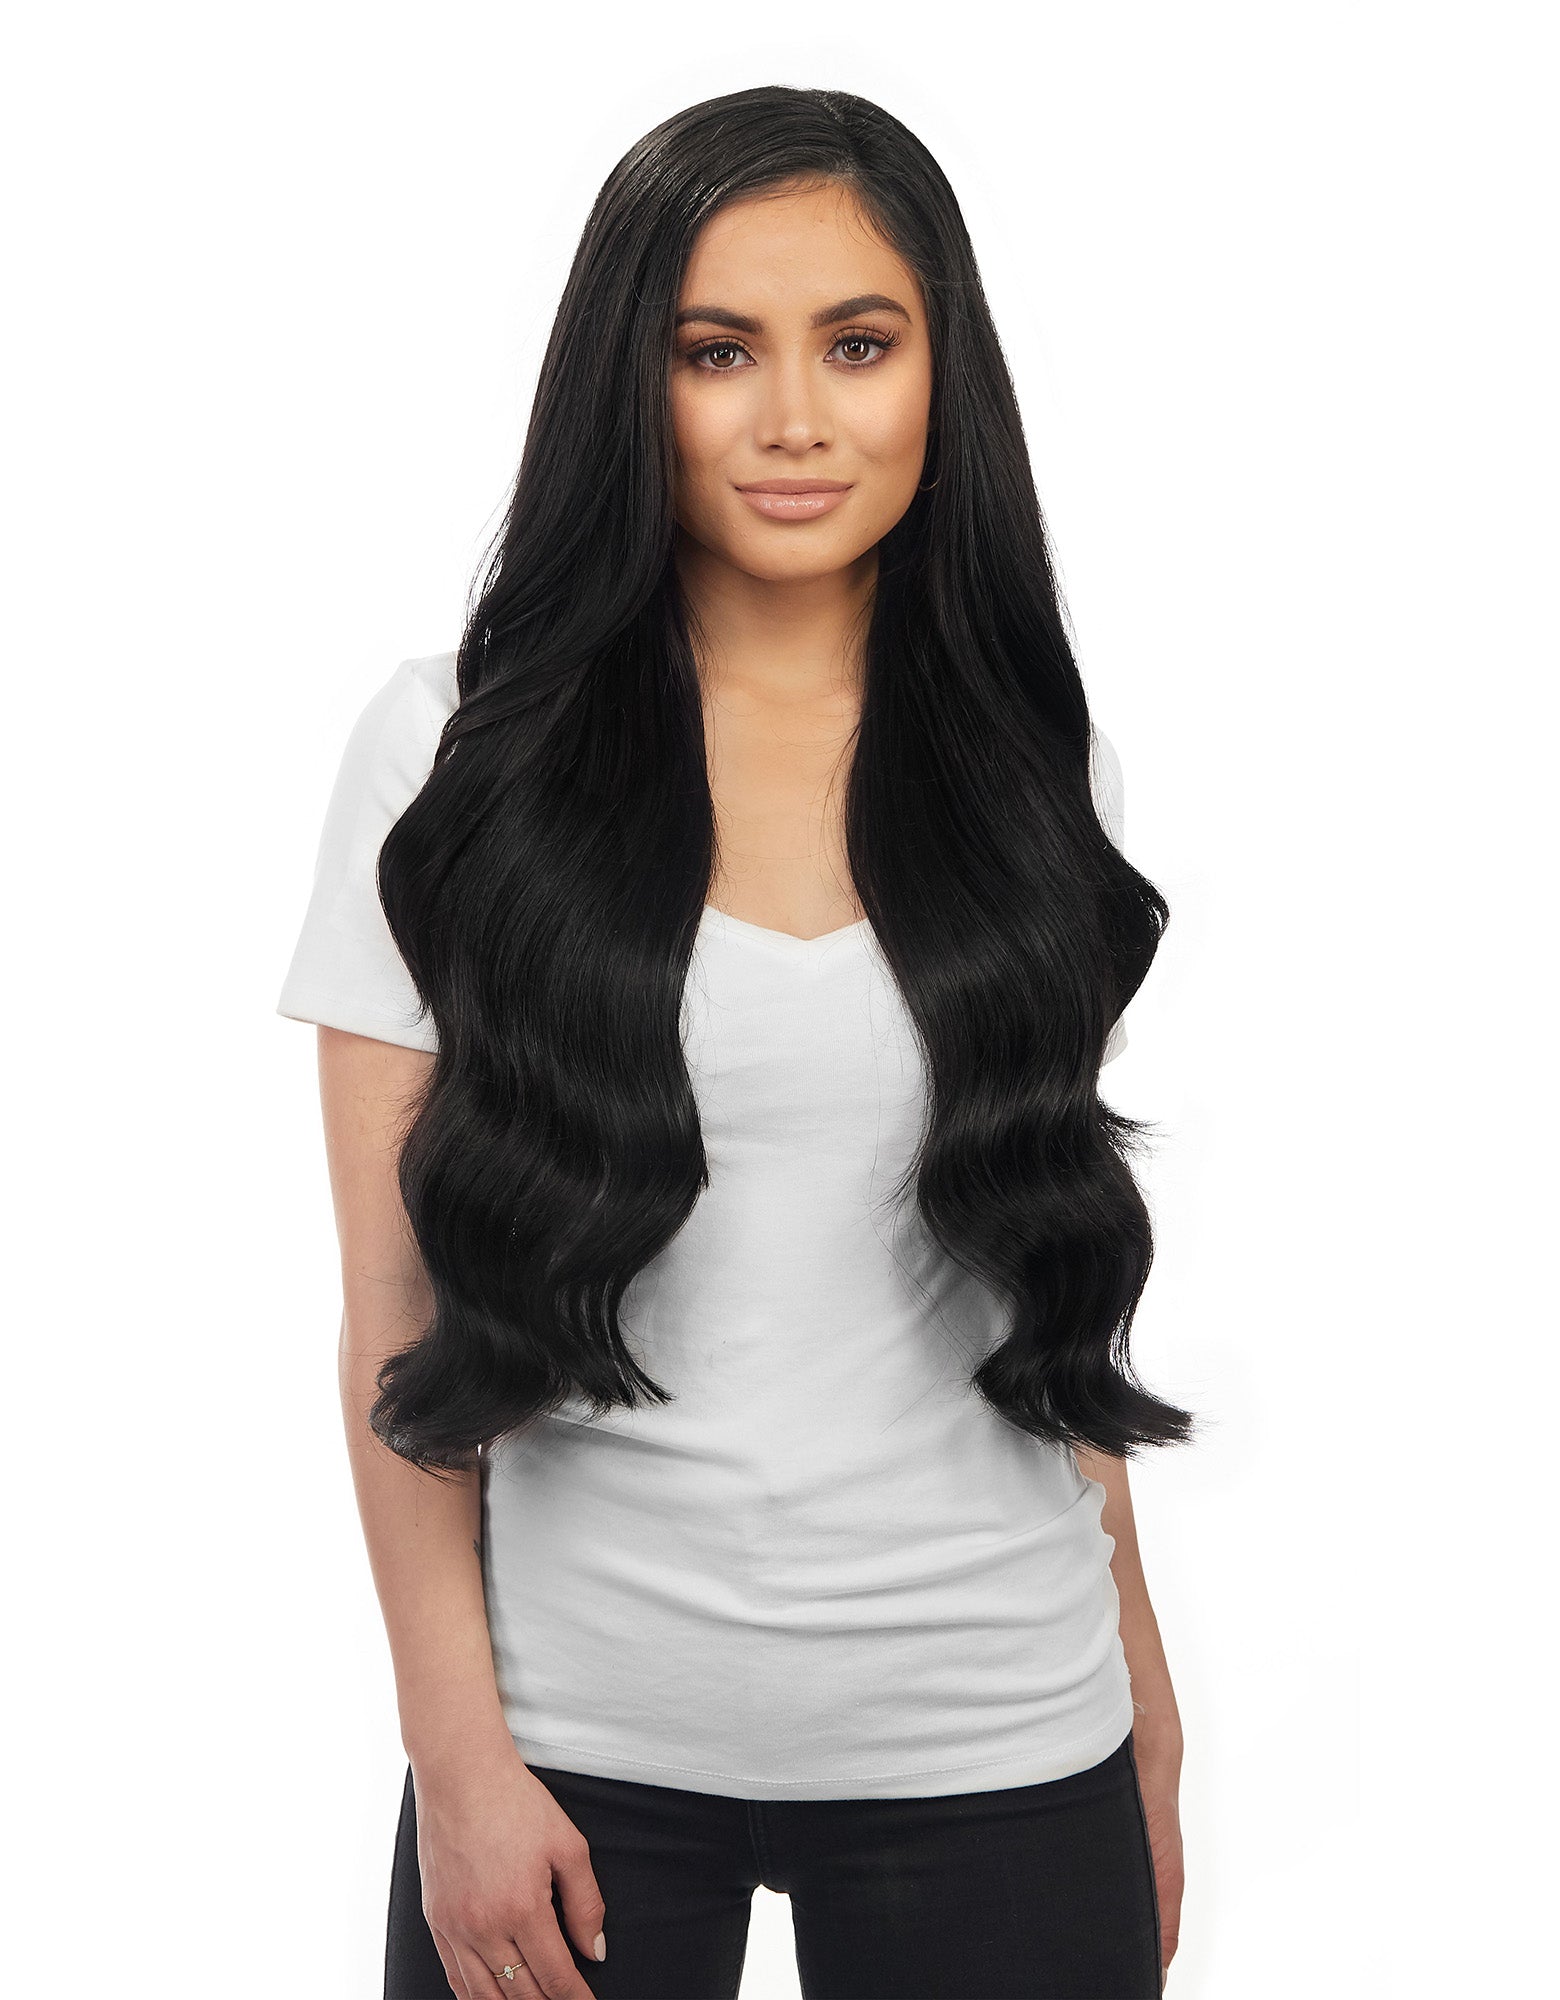 hair extensions 24